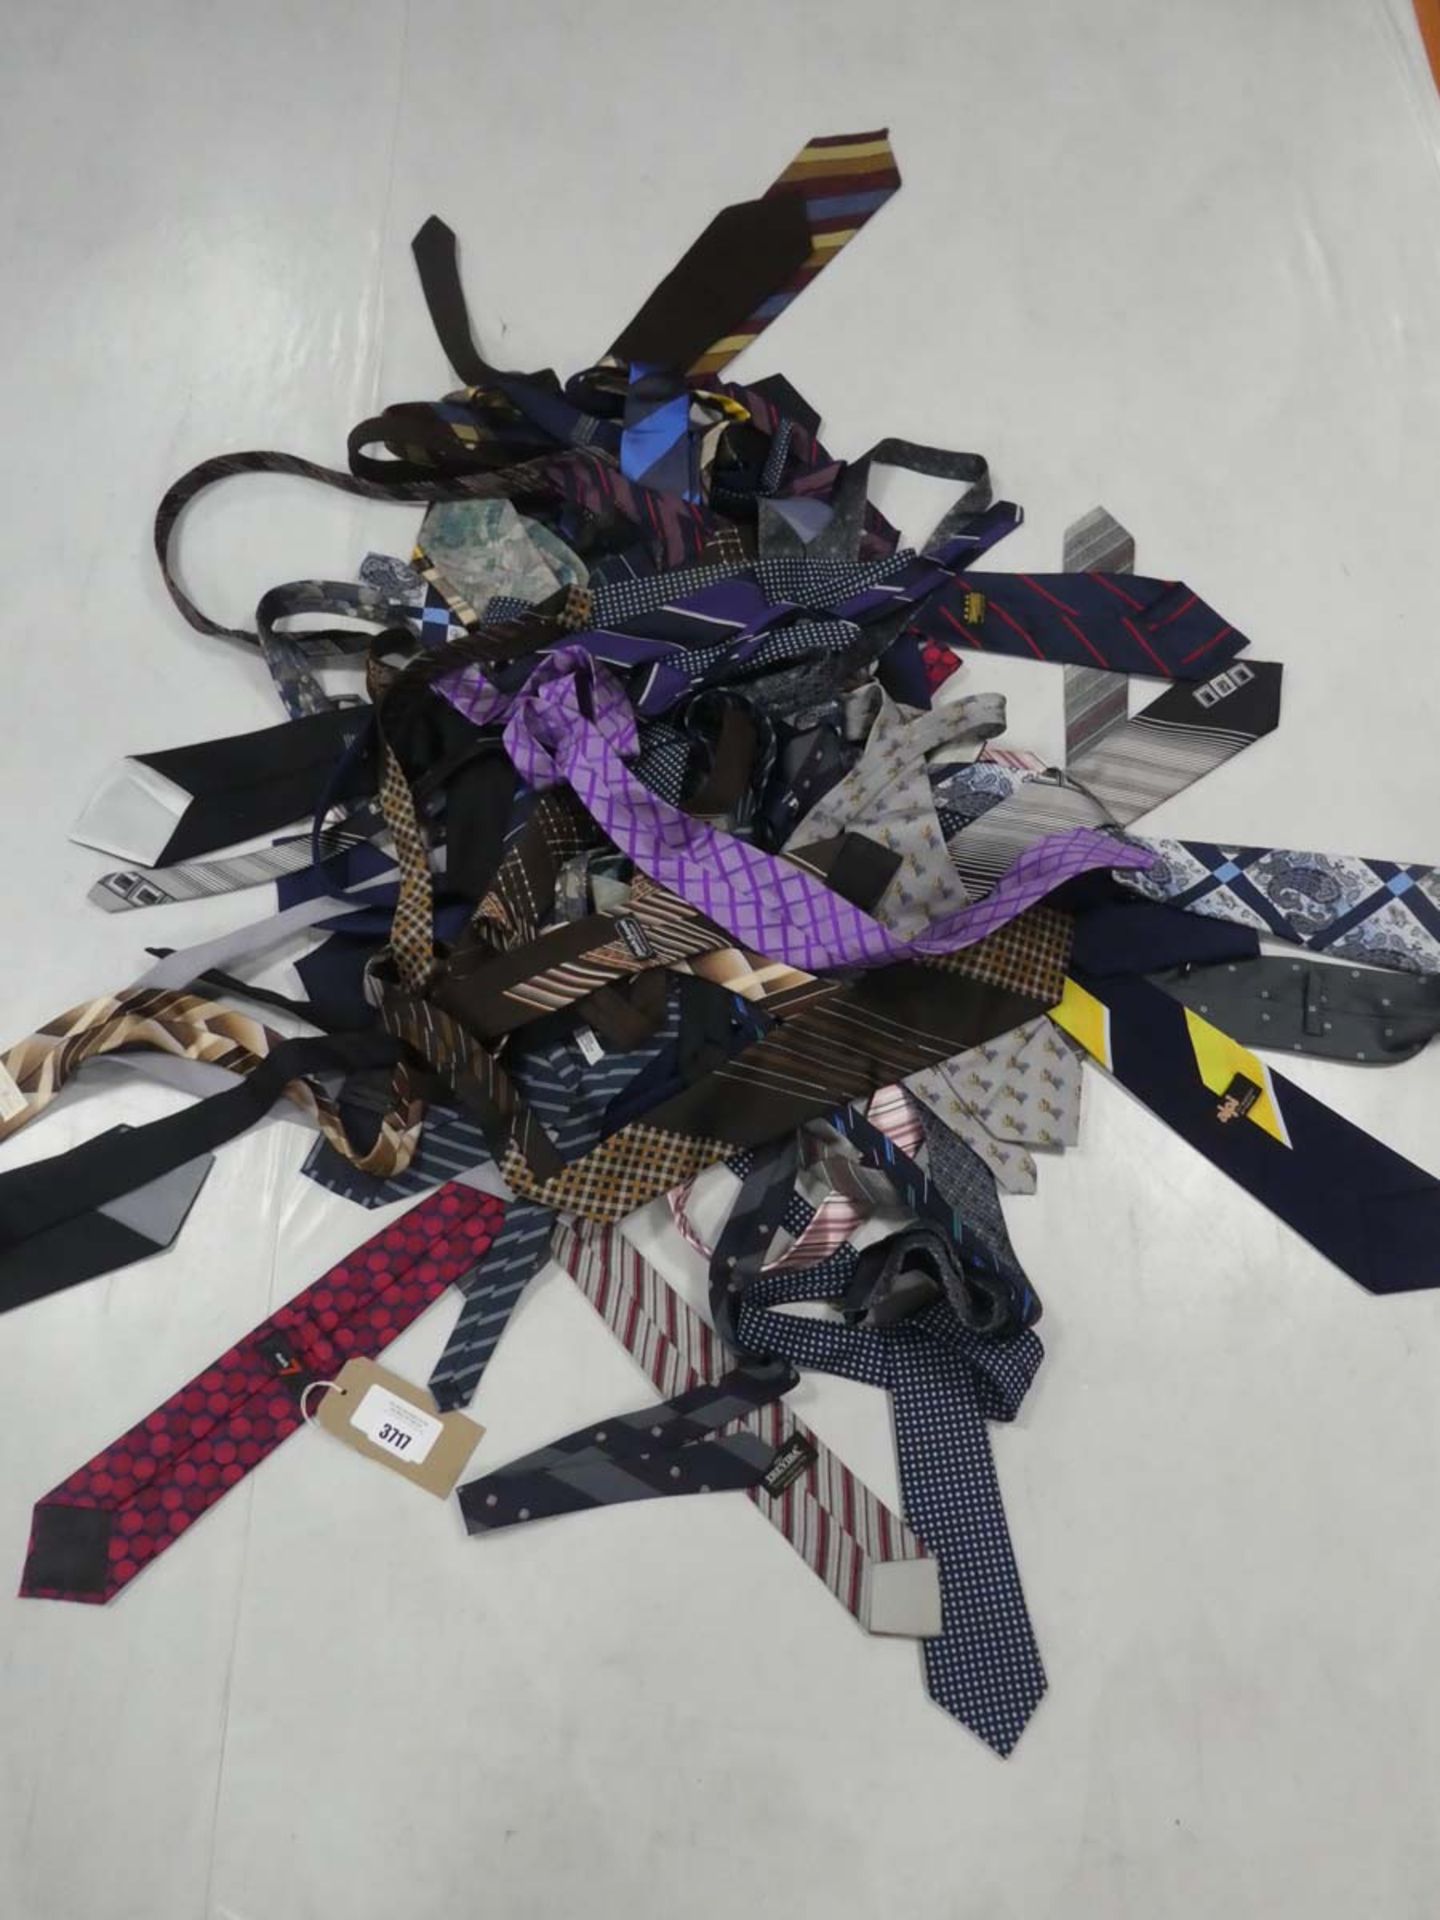 Bag containing selection of ties